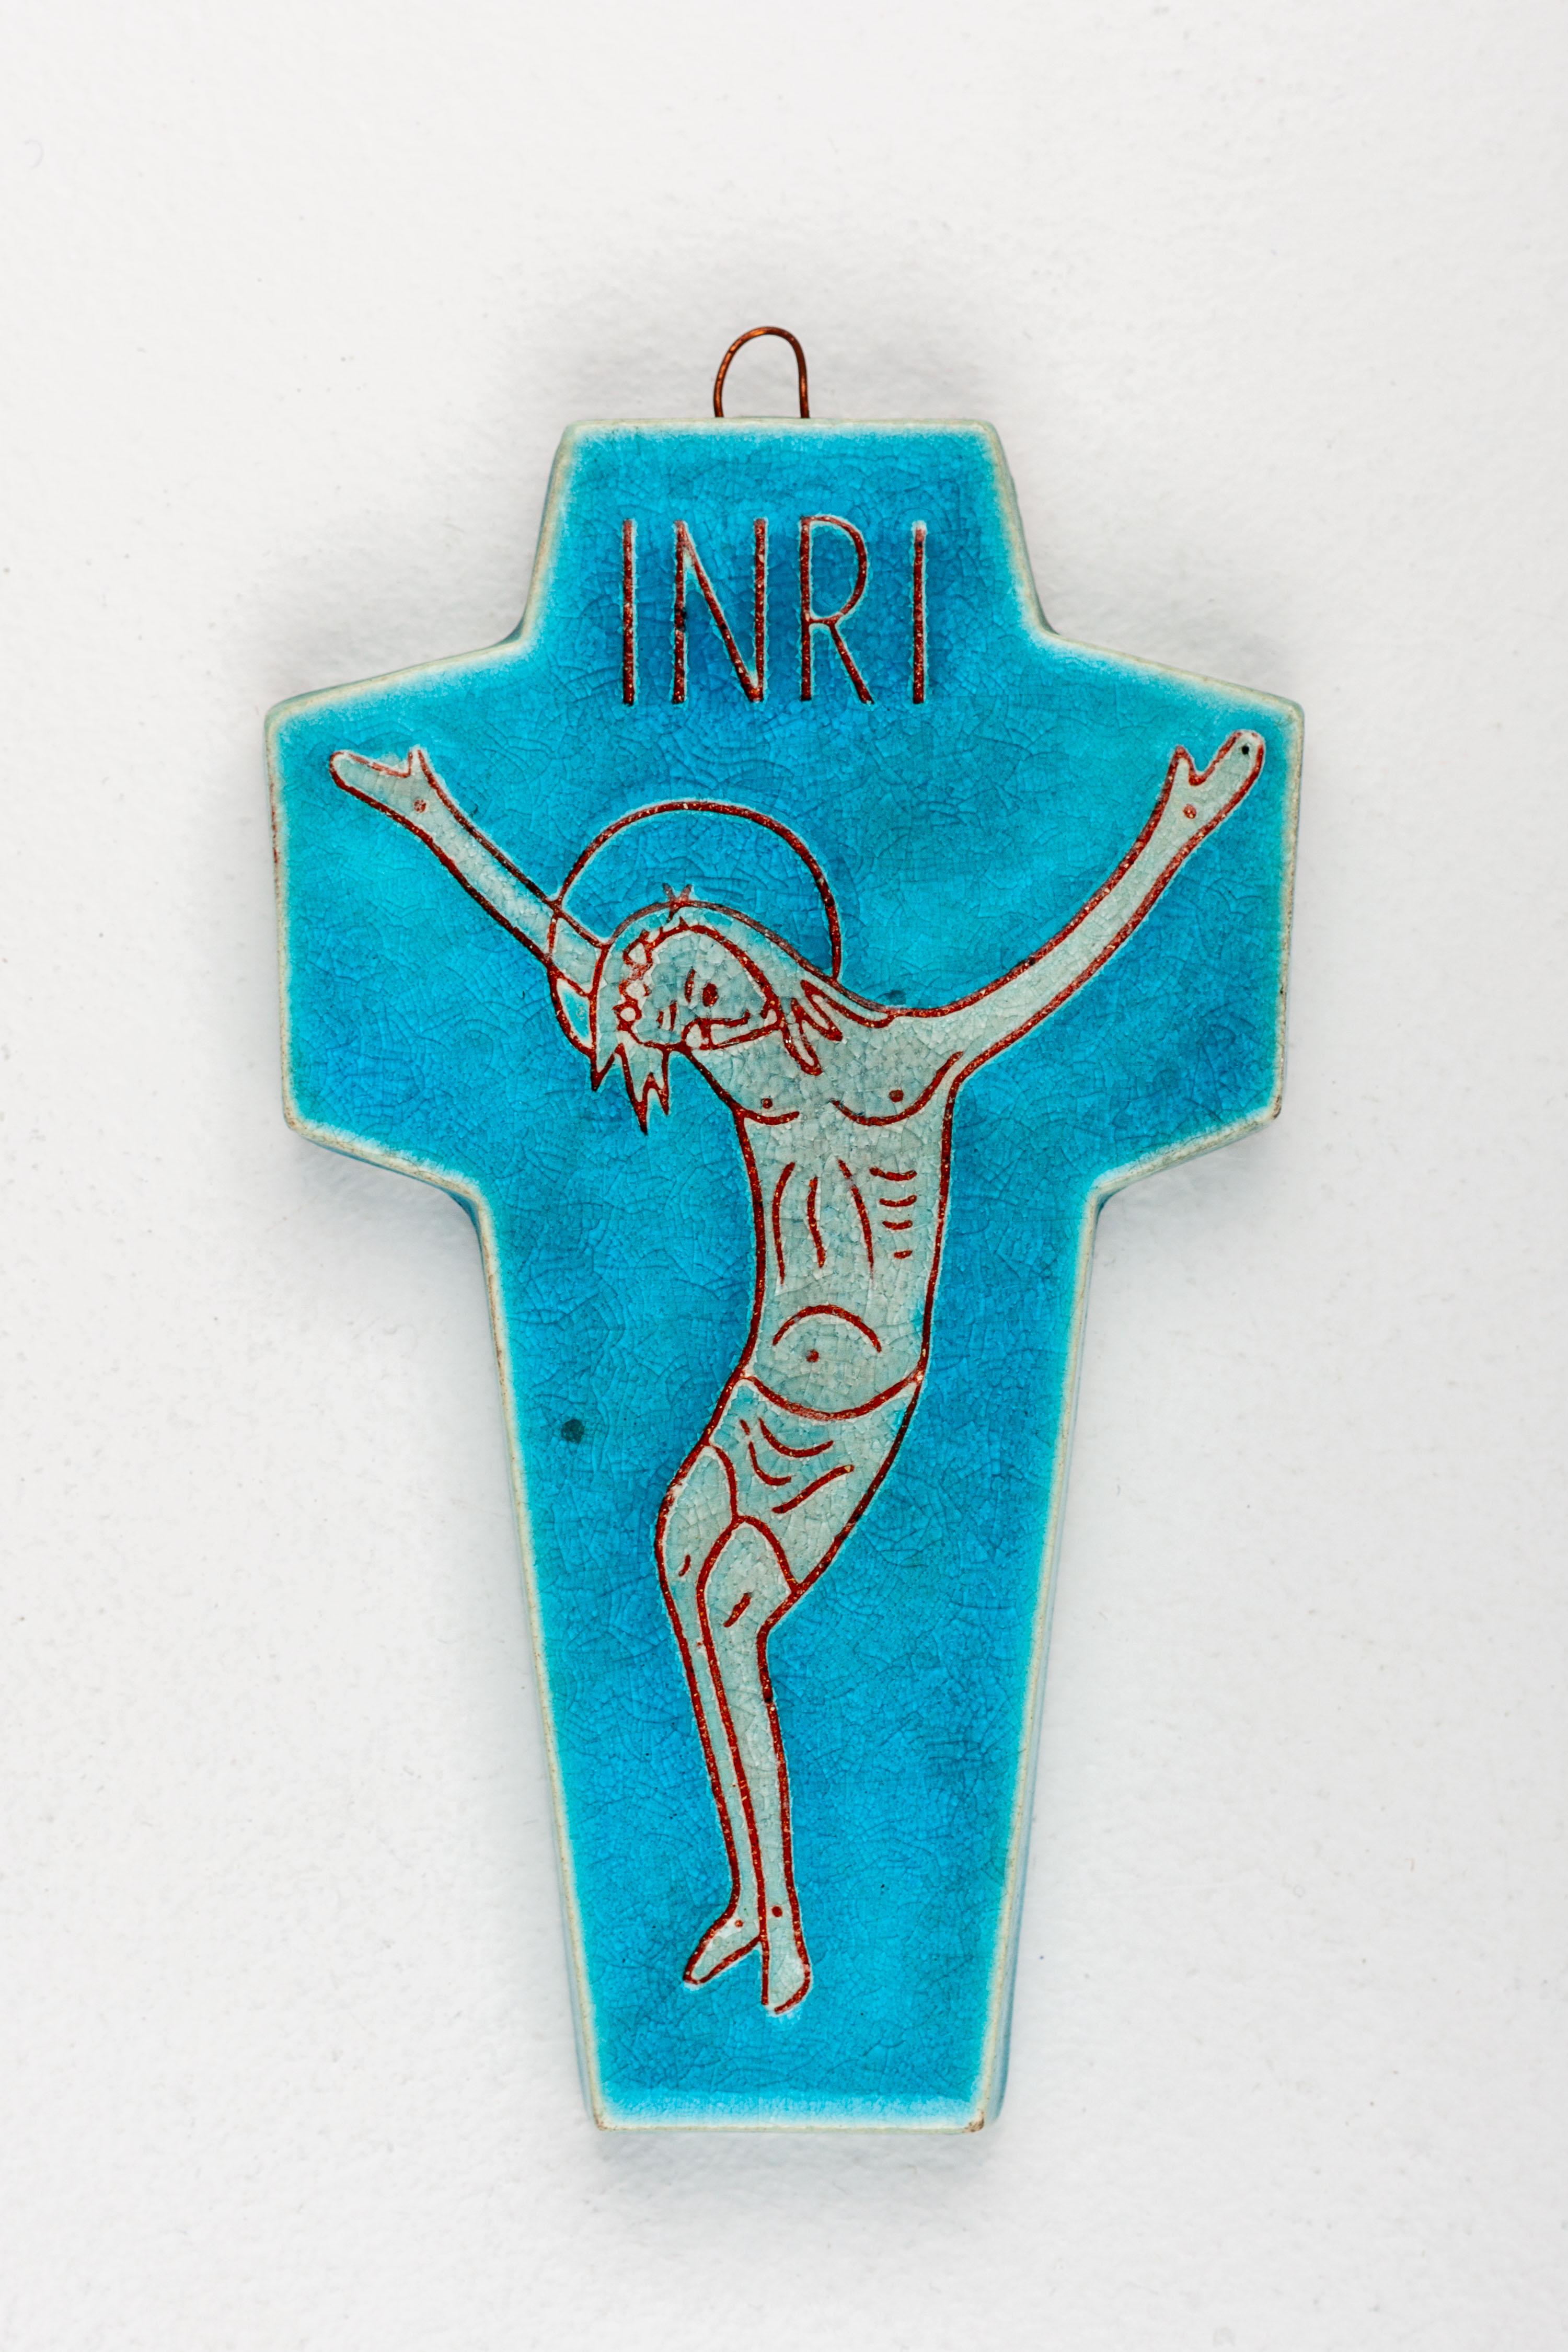 This blue-green ceramic wall cross, handcrafted in Europe by a Studio Pottery artist, blends modernist aesthetics and traditional iconography. The cross features a wide body with short wings, adorned with a modernist depiction of Jesus Christ. Above